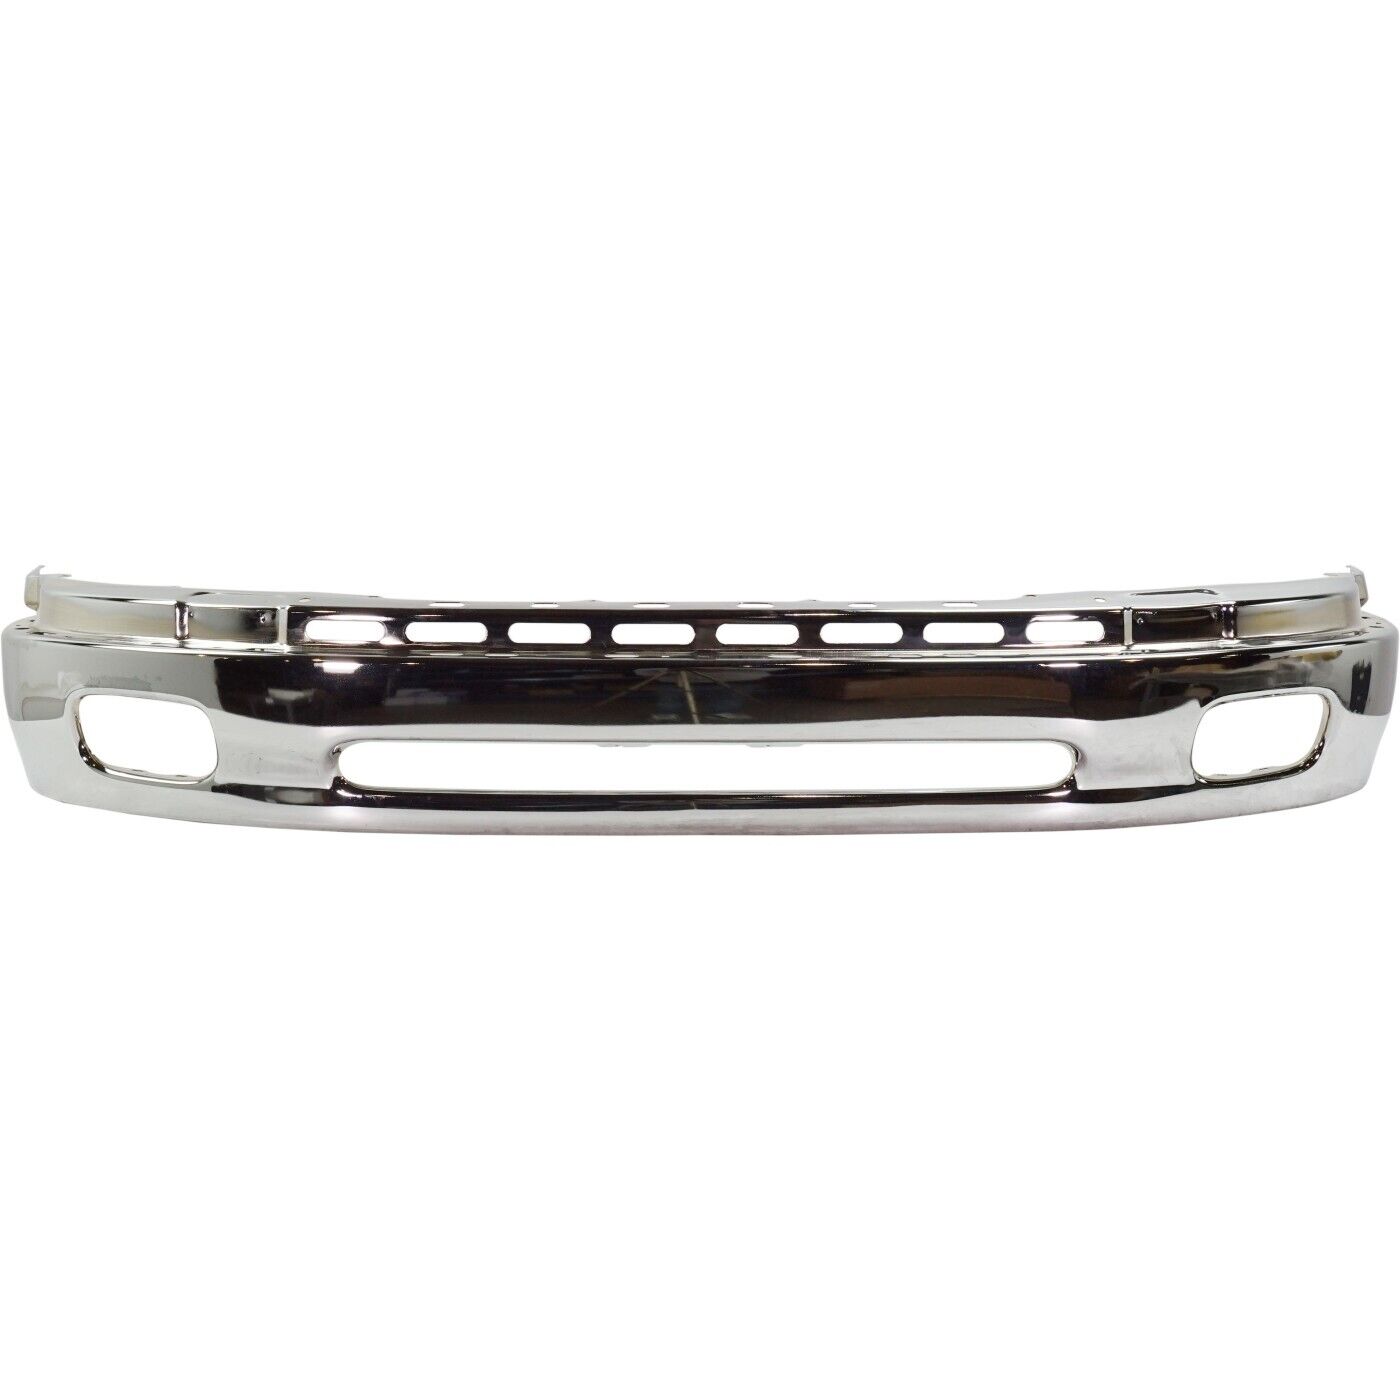 Front Lower Bumper For 2000-2006 Toyota Tundra Chrome Steel TO1002170 521010C020